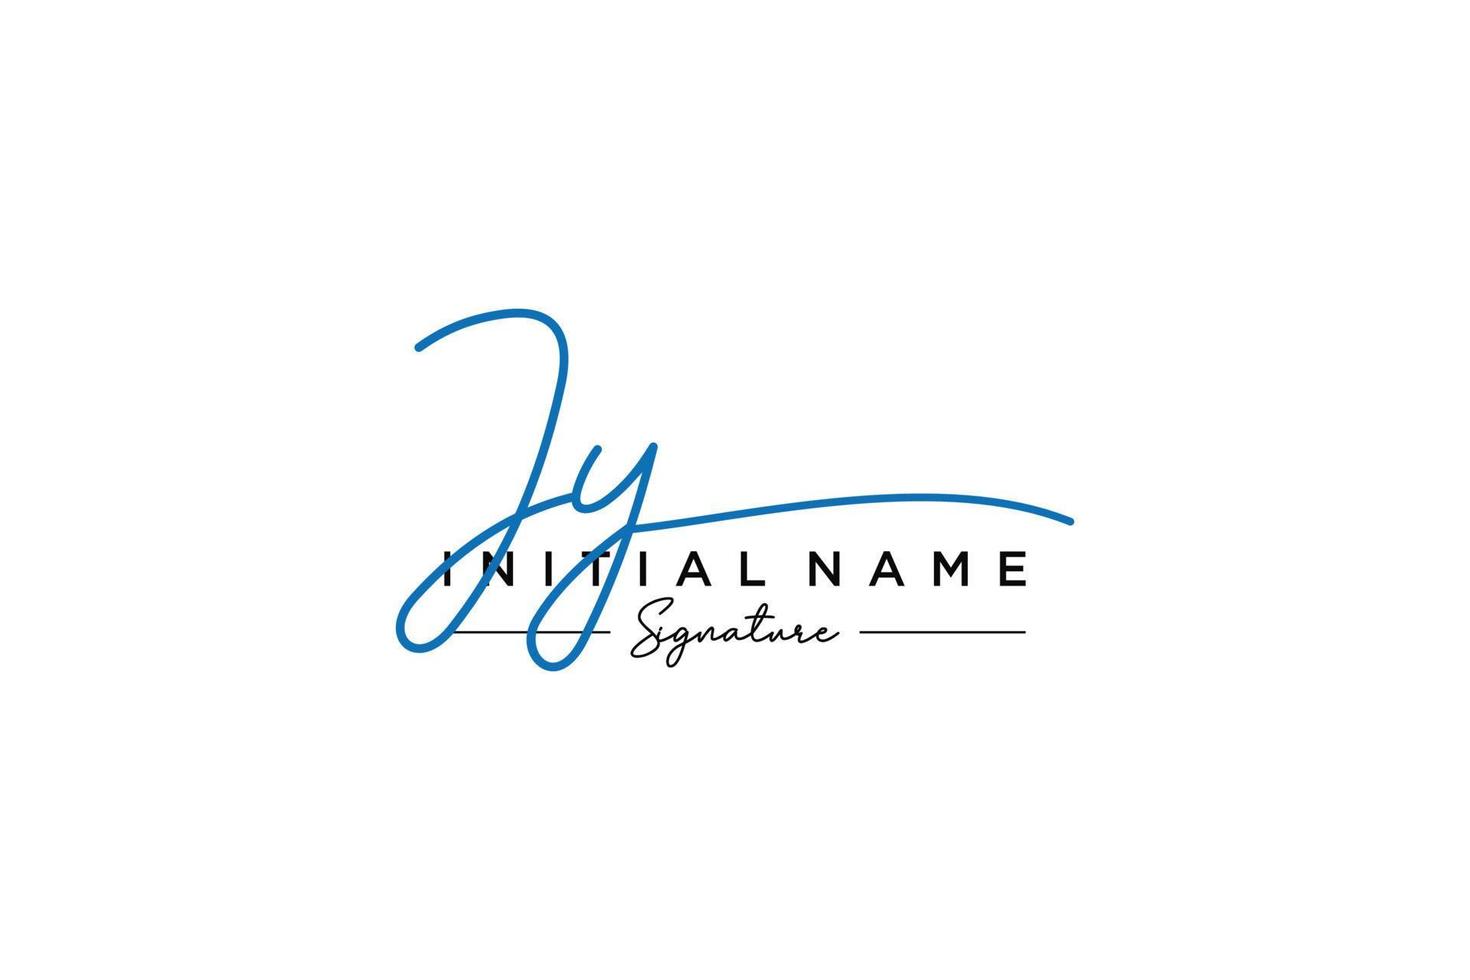 Initial JY signature logo template vector. Hand drawn Calligraphy lettering Vector illustration.